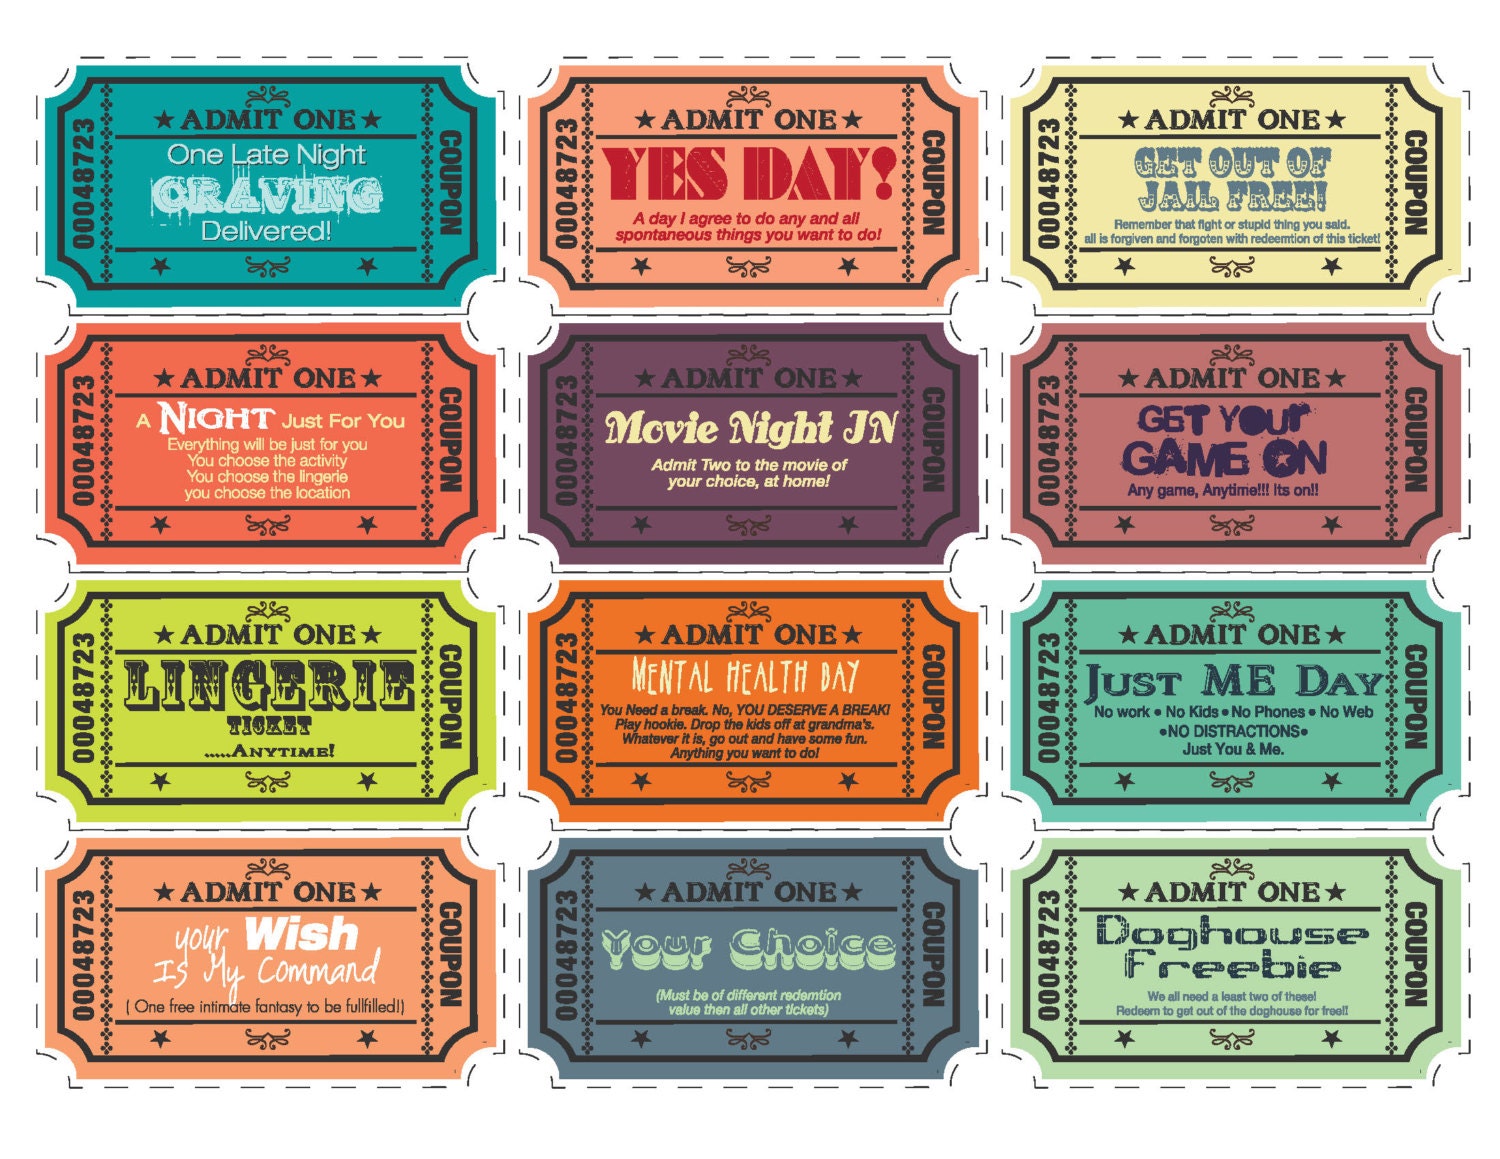 Printable Love coupons for wife/husband by TVLBDesigns on Etsy